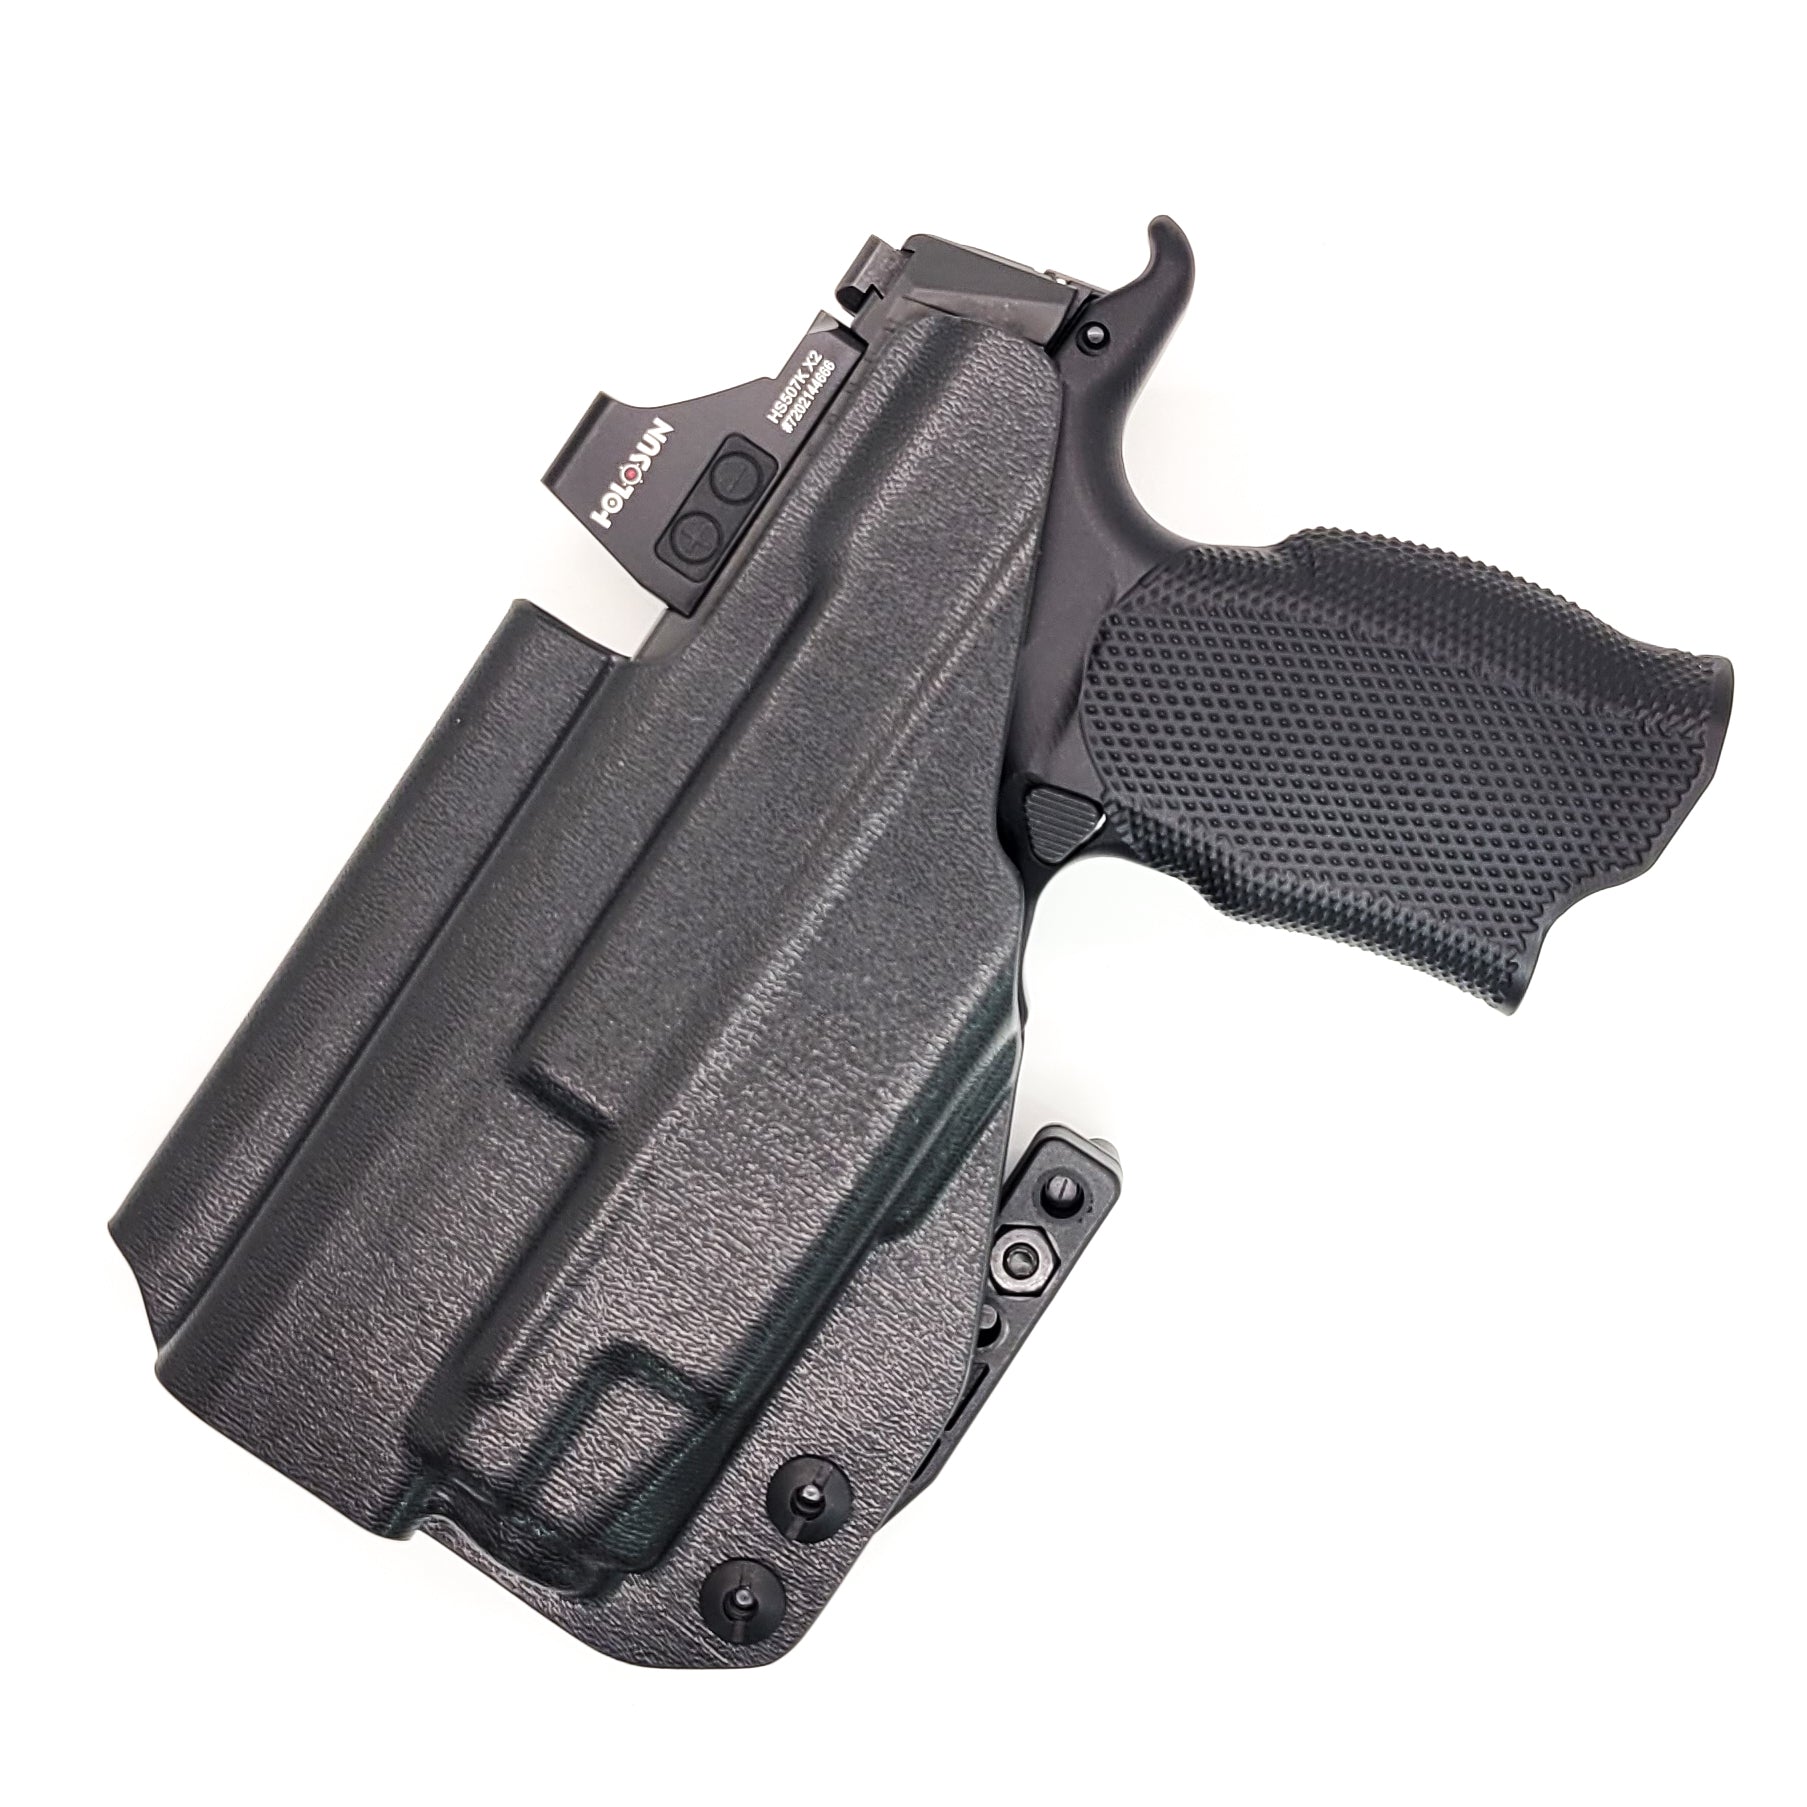 For the best concealed IWB AIWB Inside Waistband Holster designed to fit the Sig Sauer P365-XMACRO with the Icarus Precision A.C.E. 365 "X" MACRO Grip Module and the Streamlight TLR-7A or TLR-7, shop Four Brothers Holsters. Full sweat guard, Open muzzle for threaded barrels, cut for red dot sights. MACRO TLR7 TLR 7